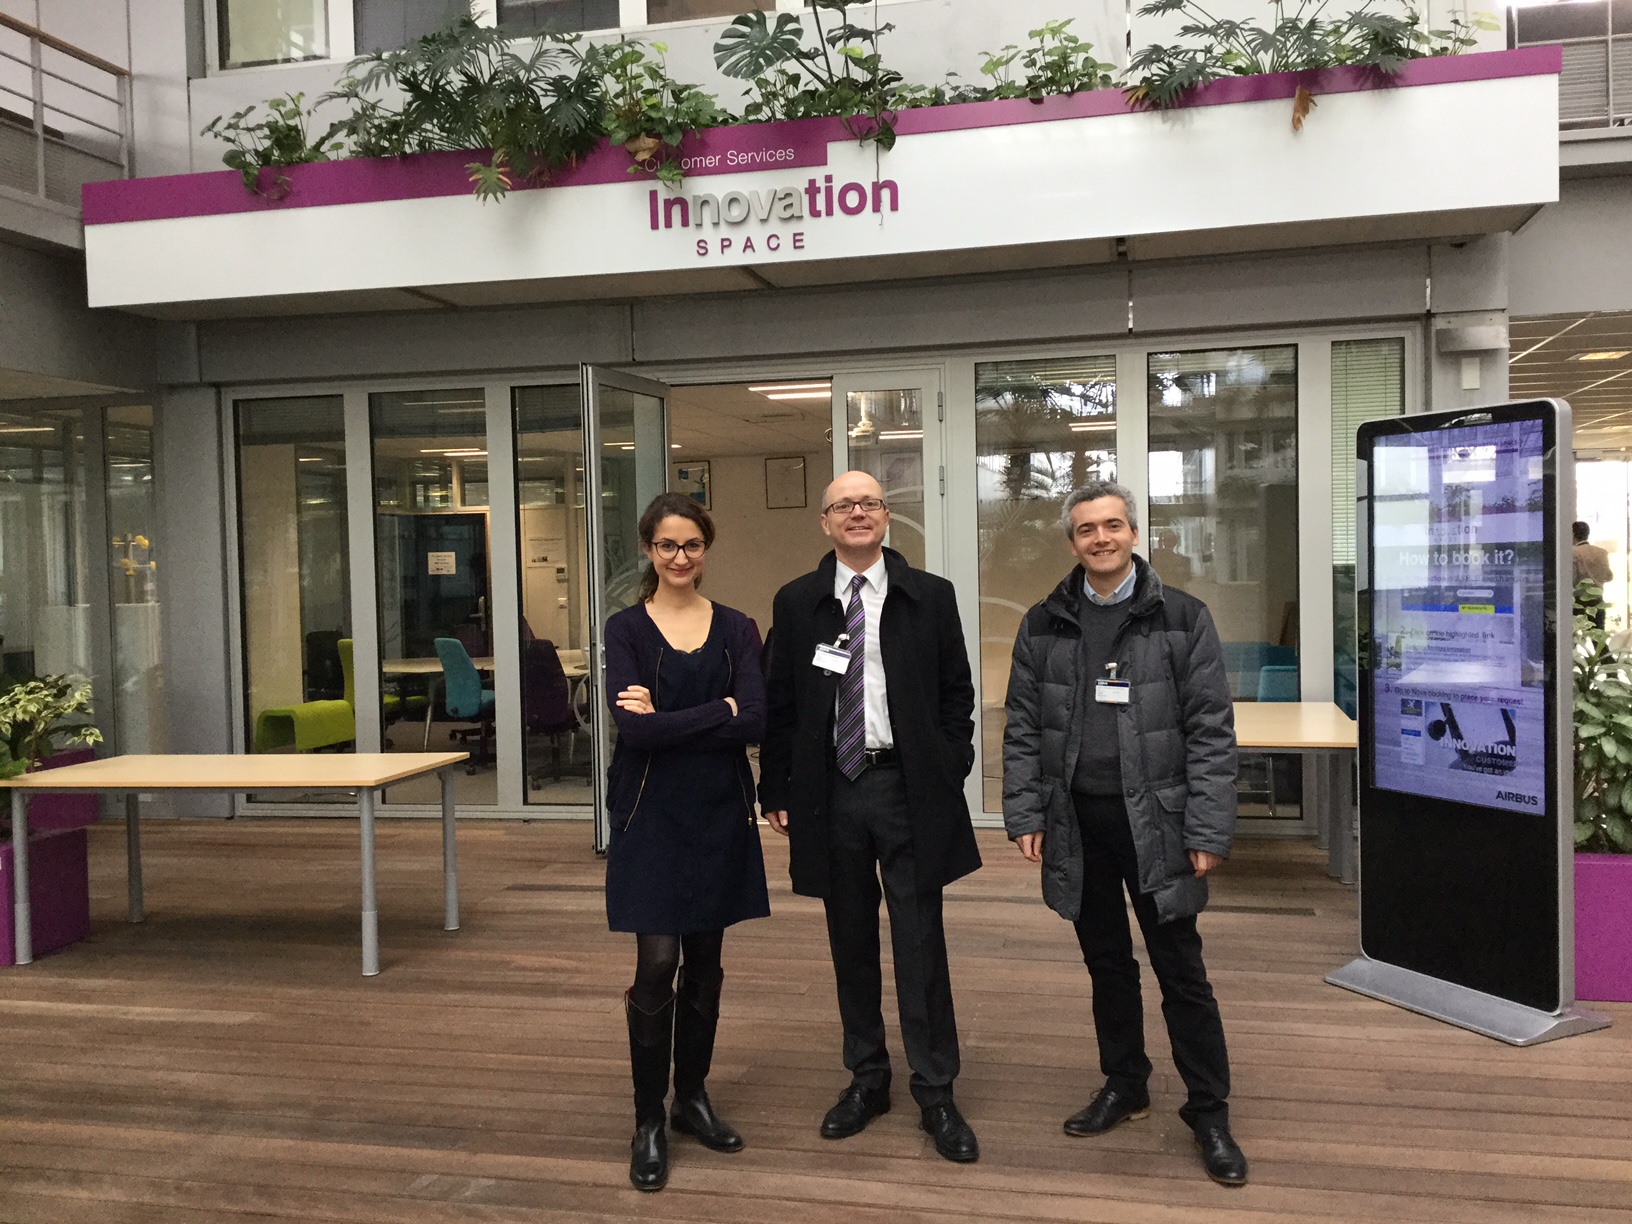 Aerospace MBA faculty visiting Airbus Customer Services Innovation Space “Nova Space” – Feb. 24, 2017